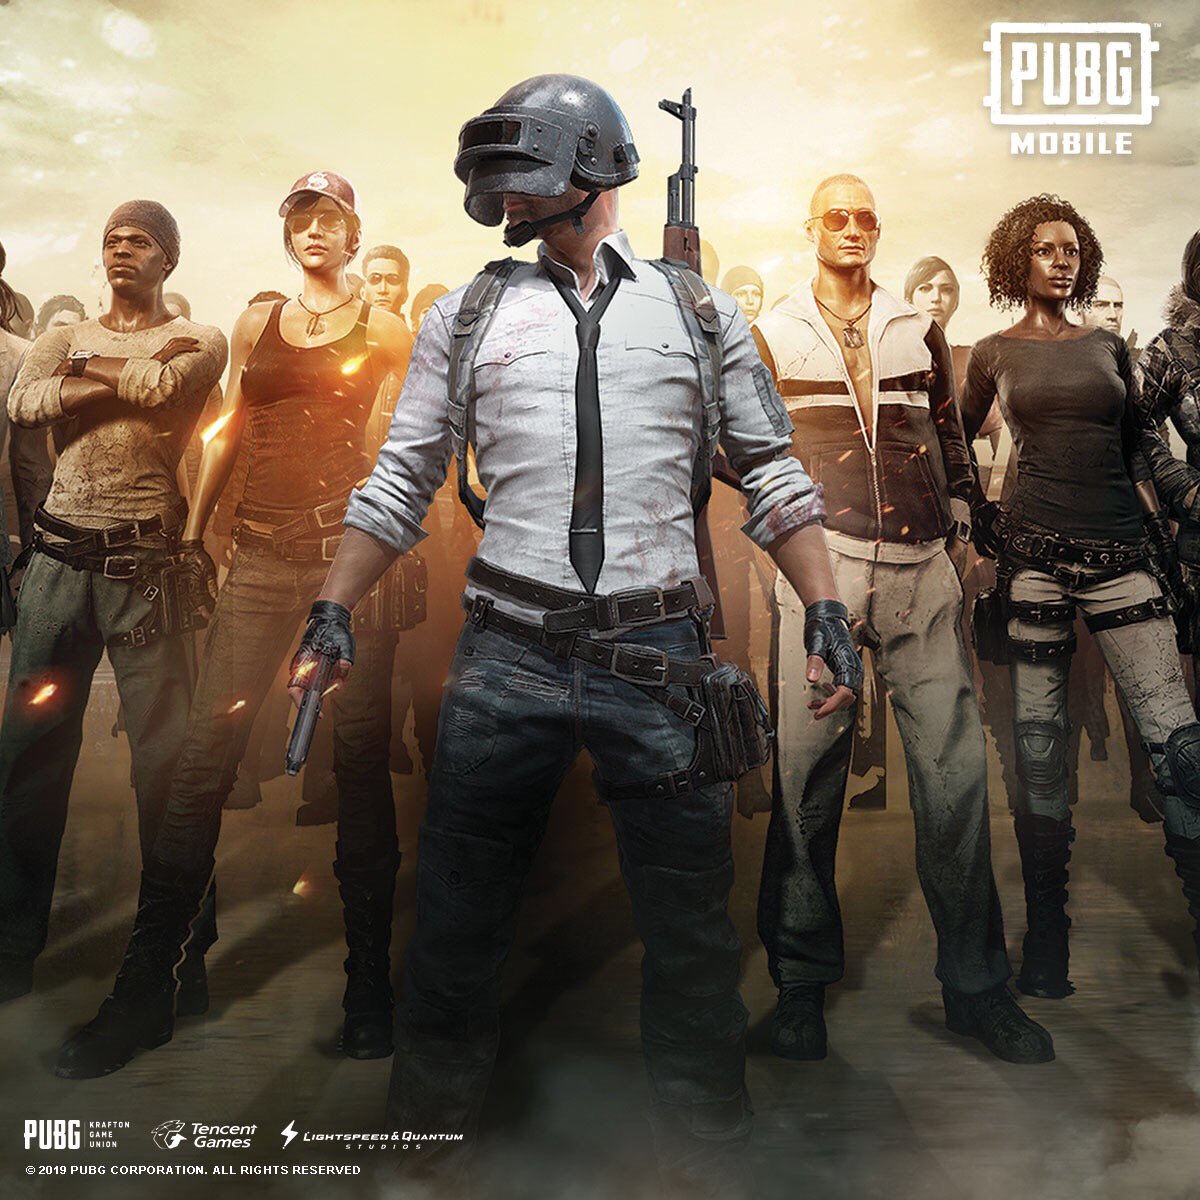 Pubg Mobile We Continue To Remove Cheating Players From Pubg Mobile Visit Our Website For A Partial List Of Players Banned Between September 10 And 16 And Please Keep Reporting